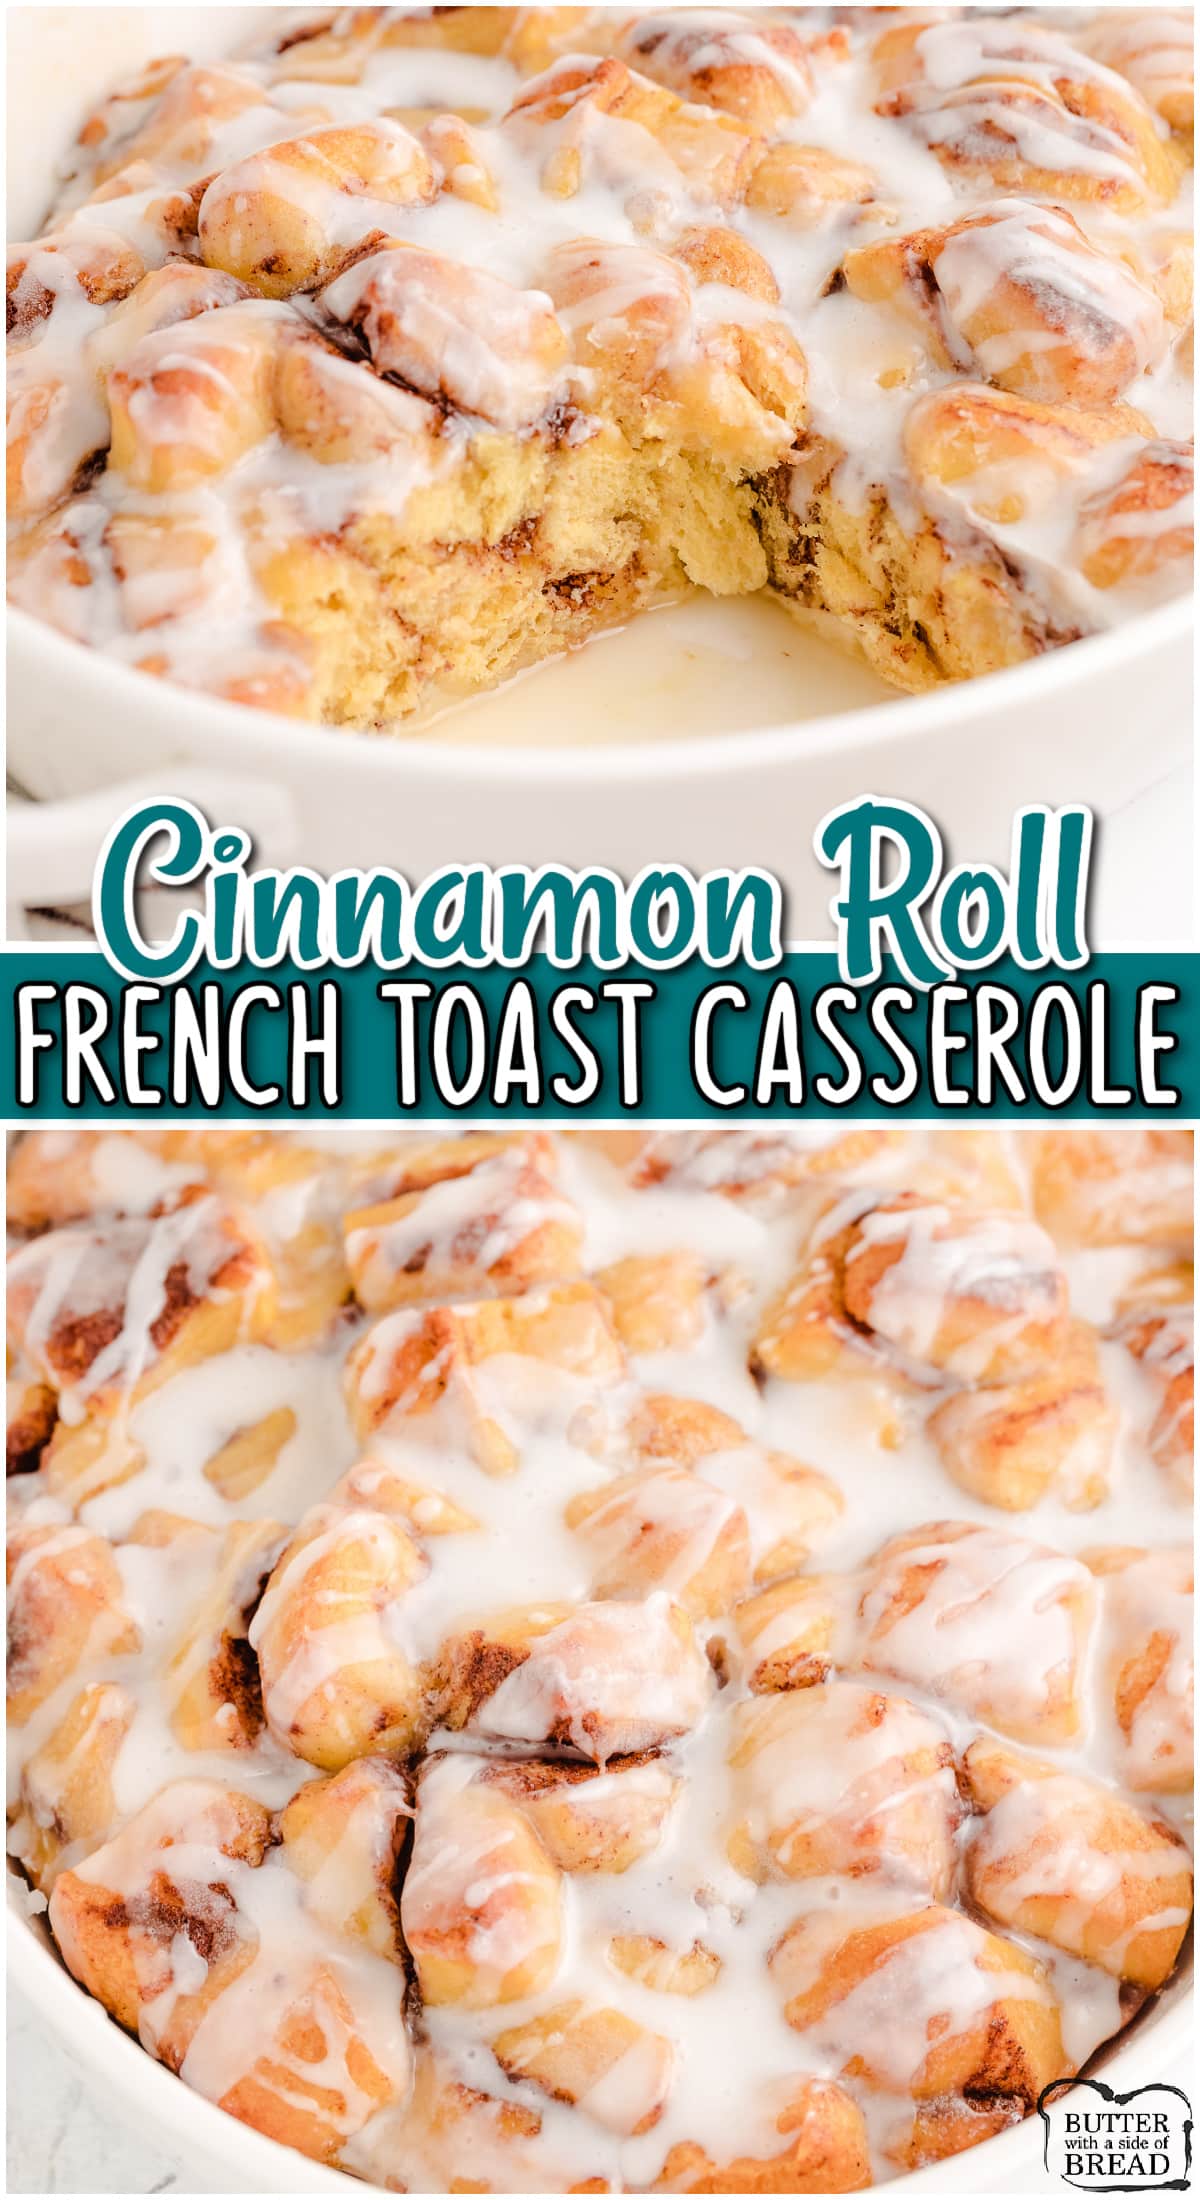 Cinnamon Roll French Toast Casserole comes together fast to create a sweet dish that everyone will love! This baked French Toast is great for breakfast, brunch or special holidays, using a package of refrigerated cinnamon rolls makes this recipe so easy to make.